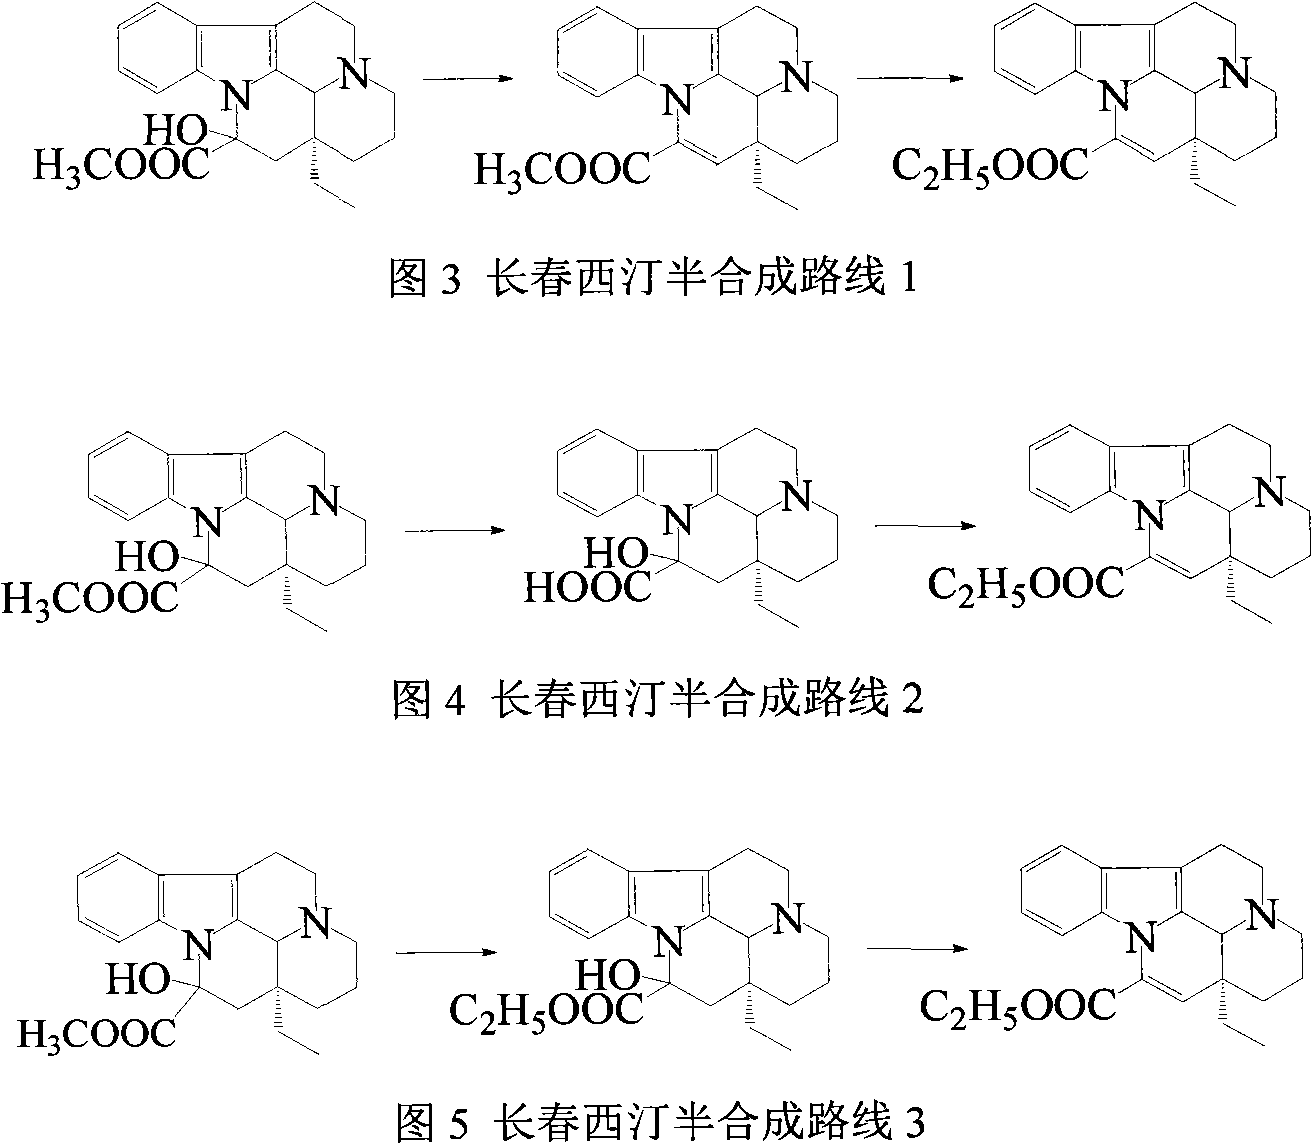 Semi-synthesis of vinpocetine through one kettle way and preparation of water-soluble vinpocetine salt